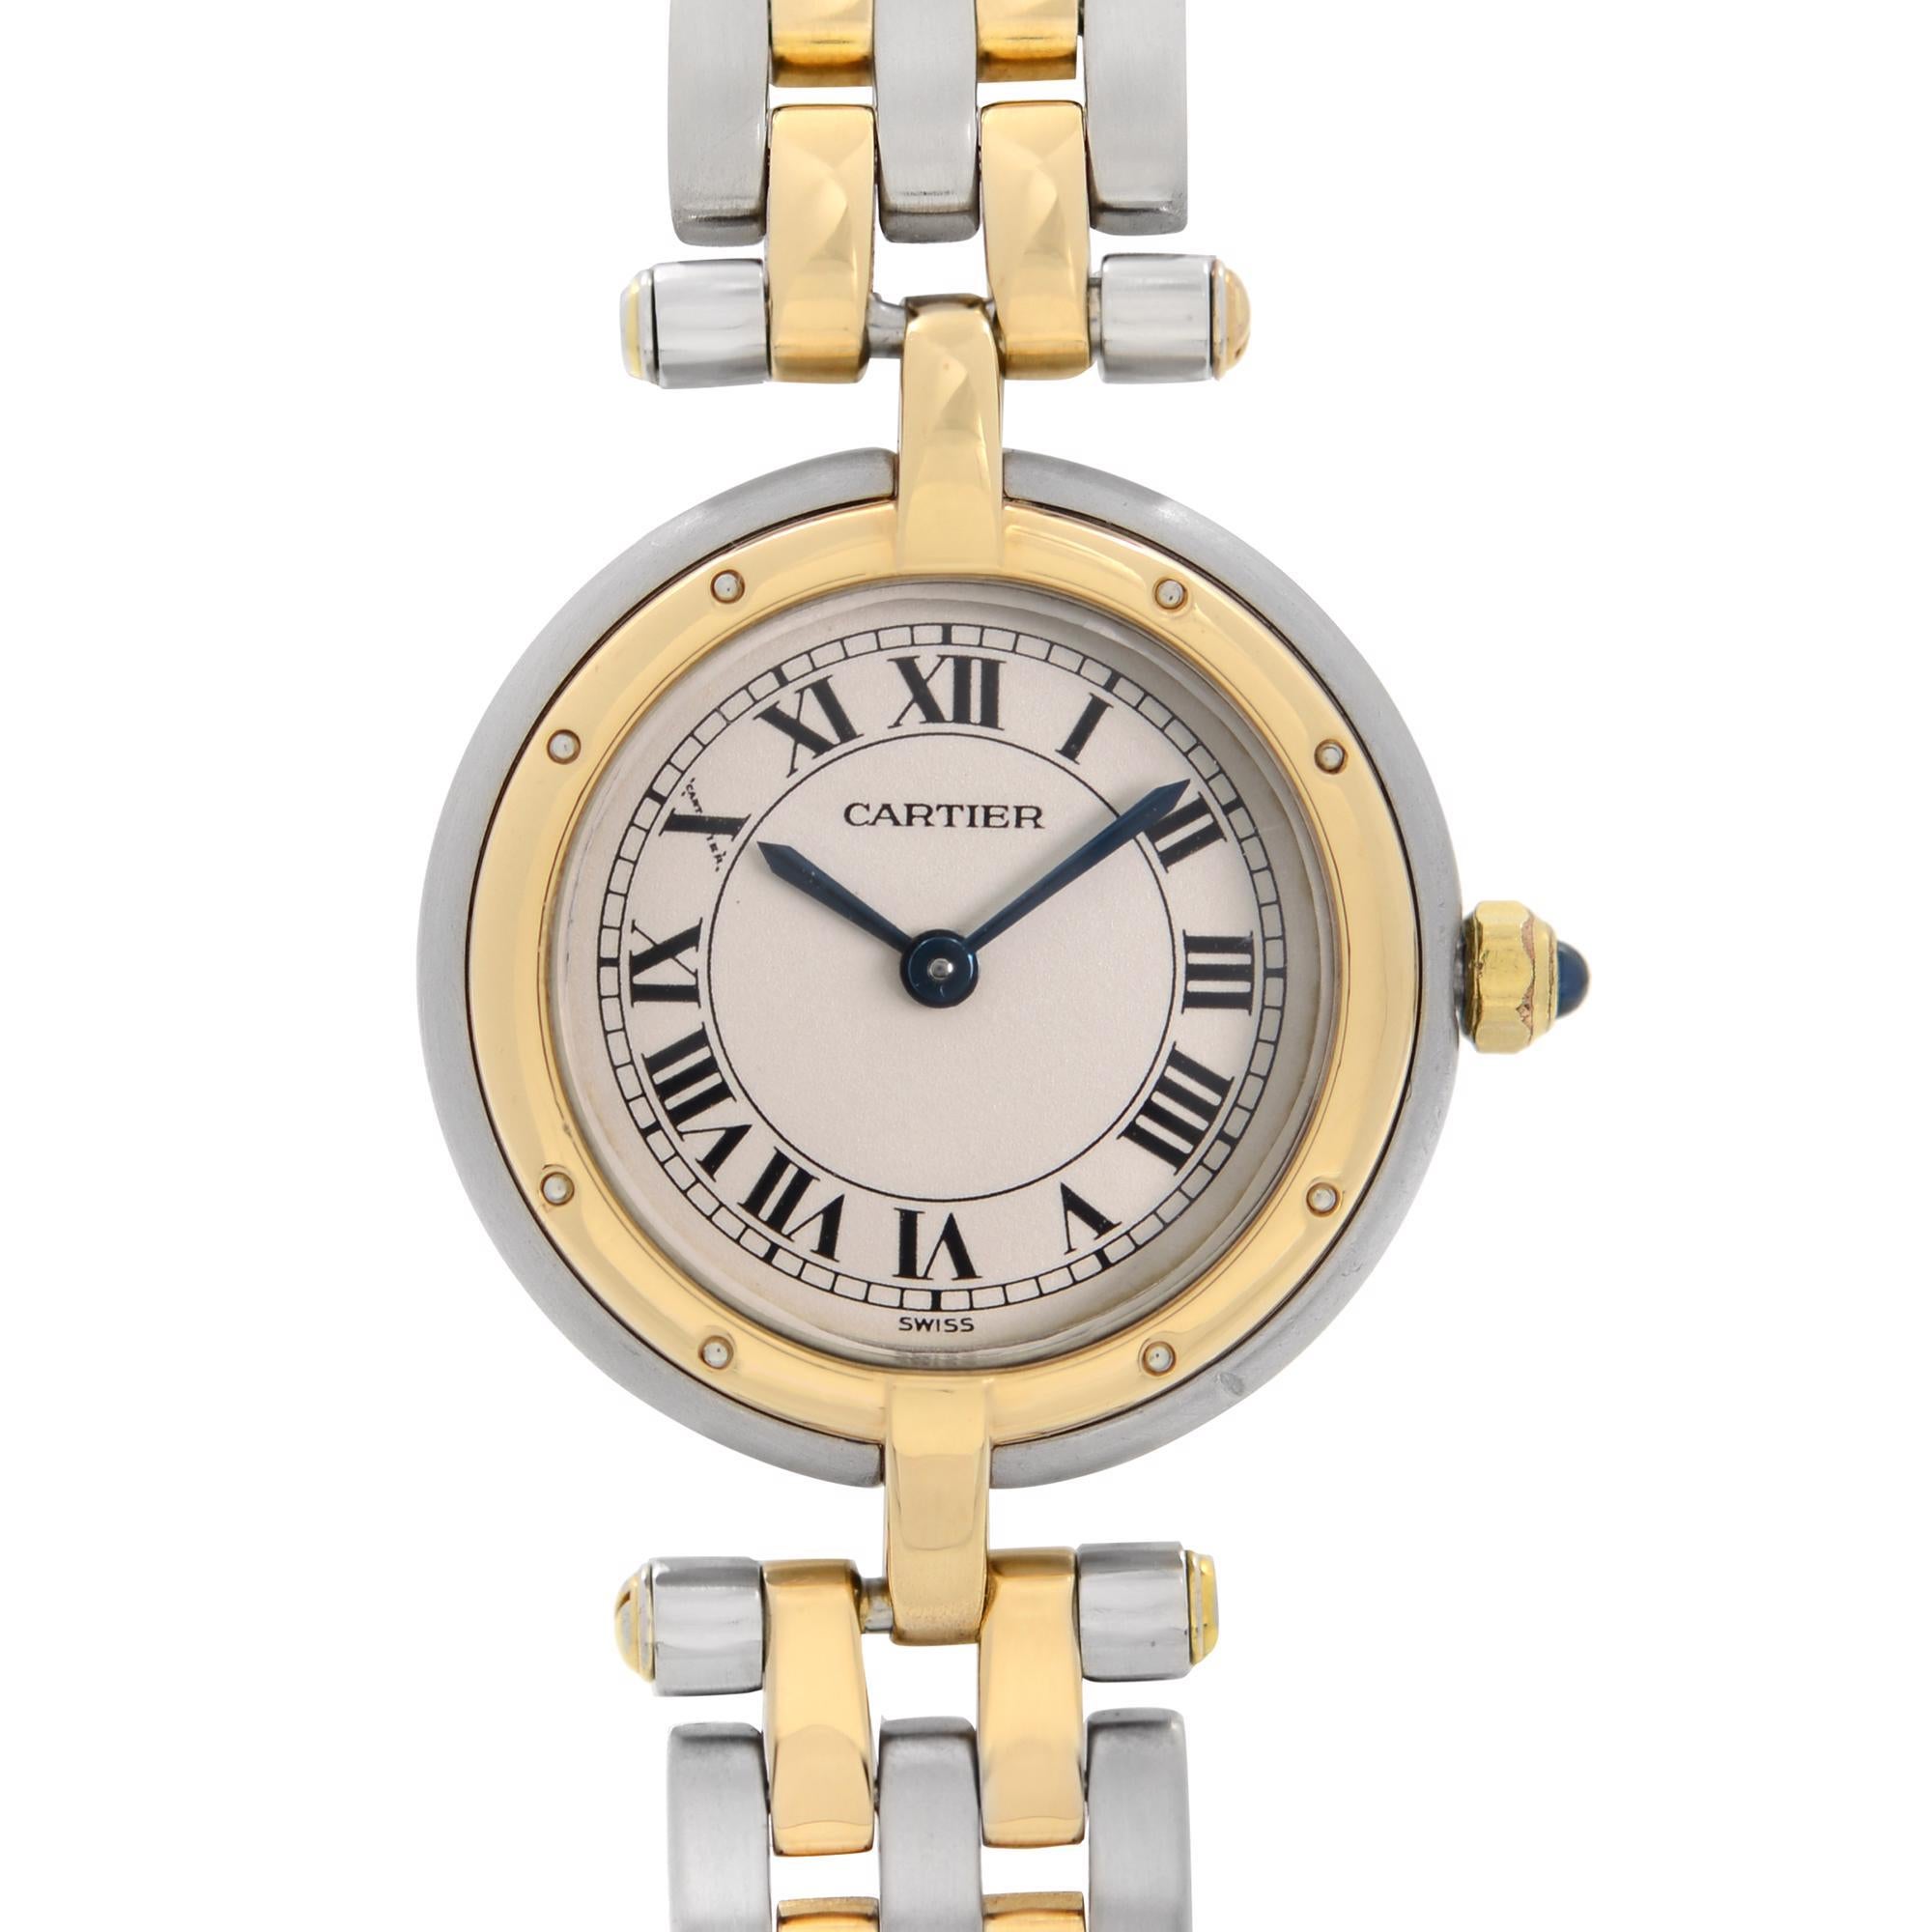 Pre-owned Cartier Panthere 24mm 2 Row 18K Gold Steel Beige Dial Quartz Ladies Watch 16109. Band Shows Moderate Slack. This Beautiful Timepiece is Powered by Quartz (Battery) Movement And Features: Round Stainless Steel Case with a Steel and 18k